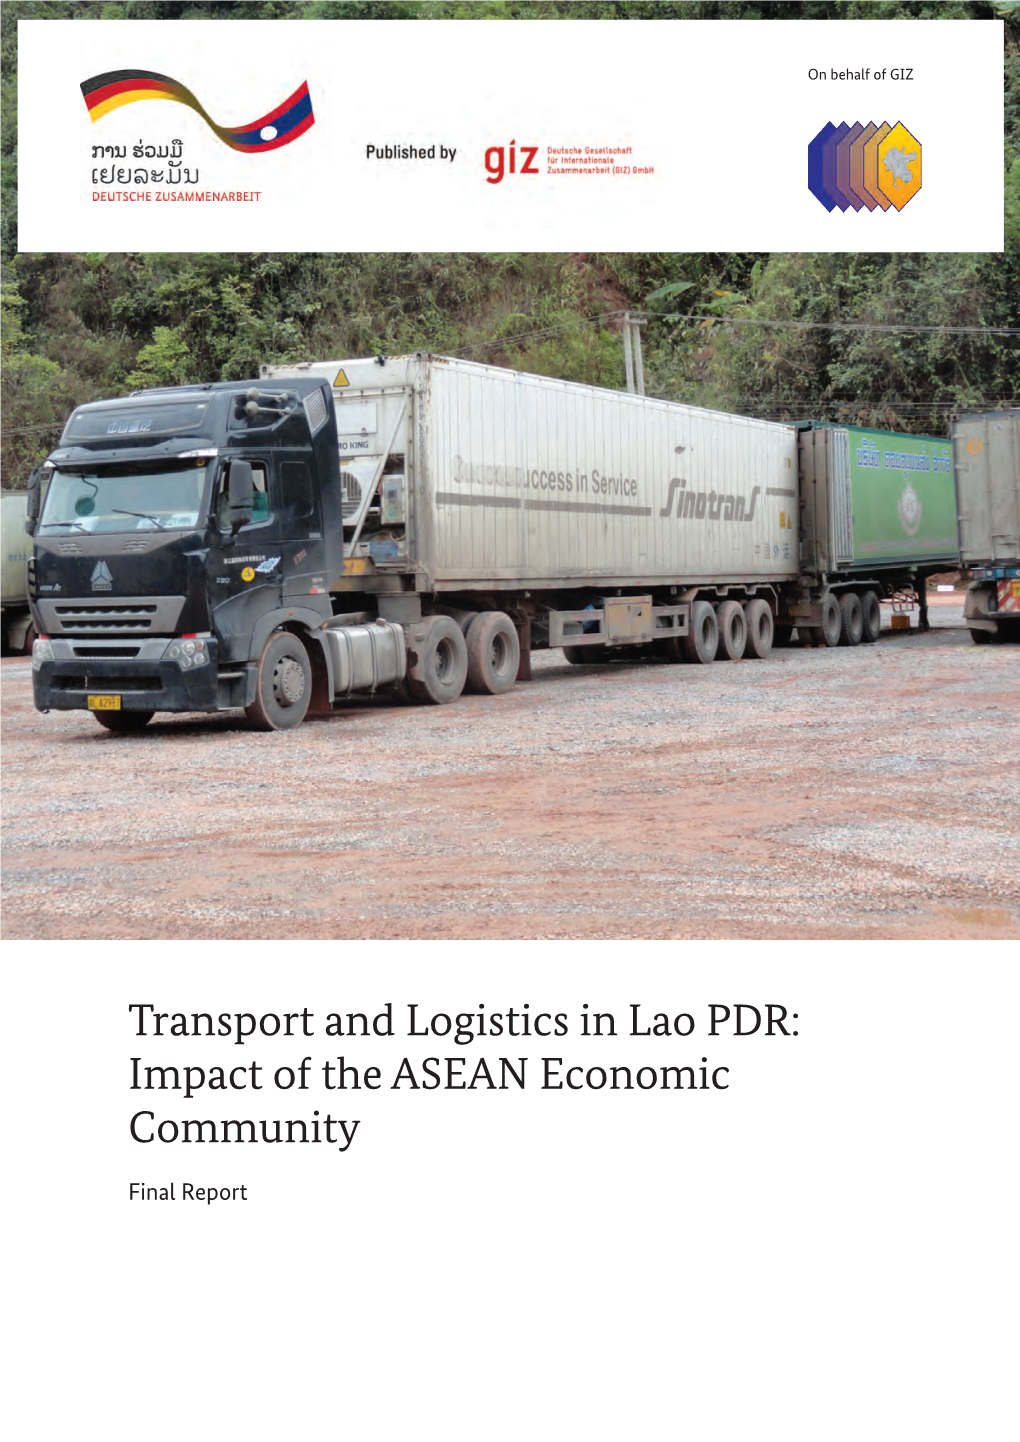 Transport and Logistics in Lao PDR: Impact of the ASEAN Economic Community